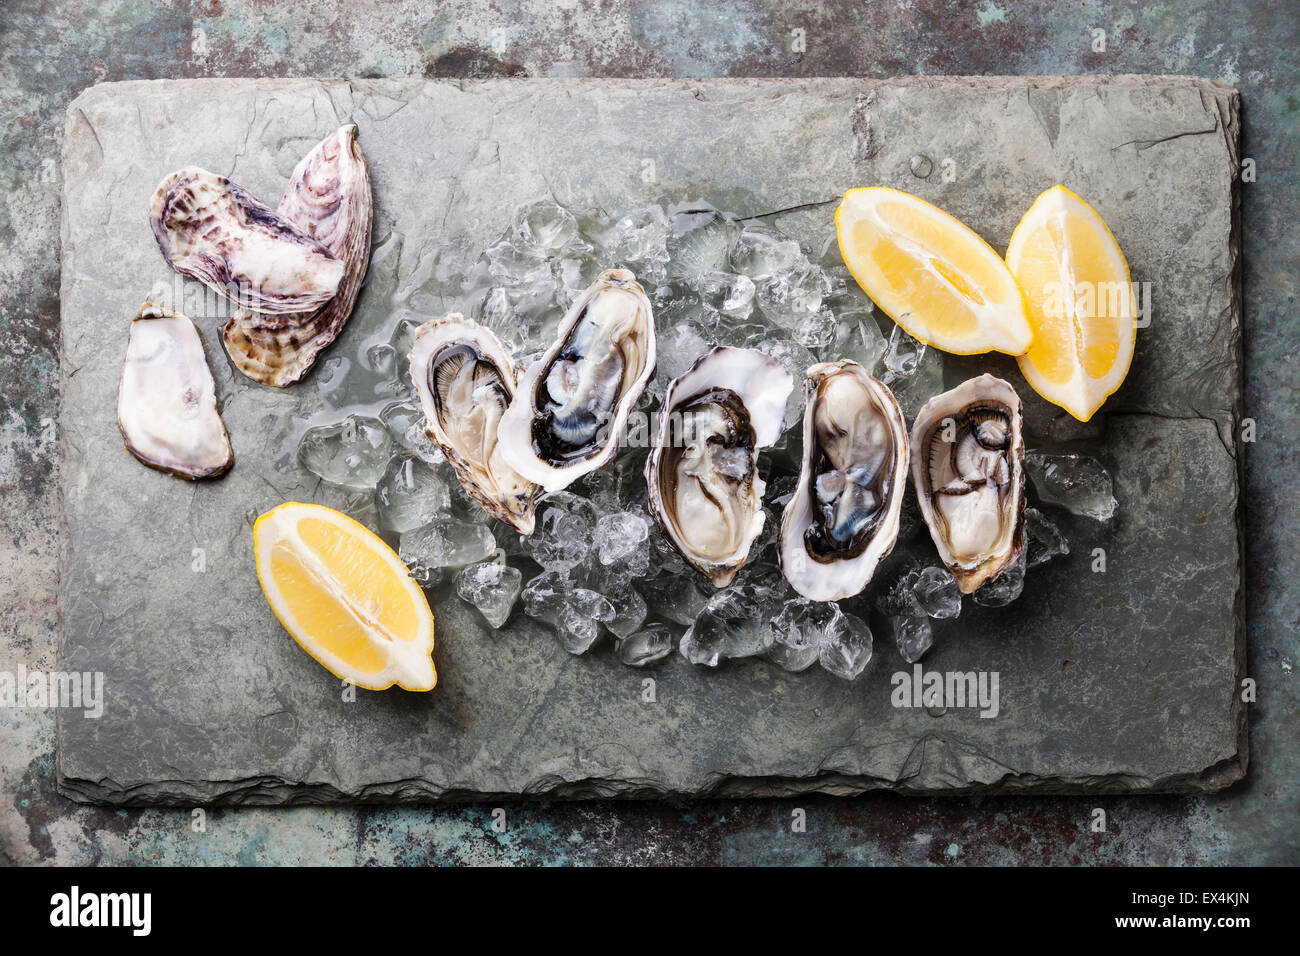 Opened Oysters on stone plate with ice and lemon Stock Photo